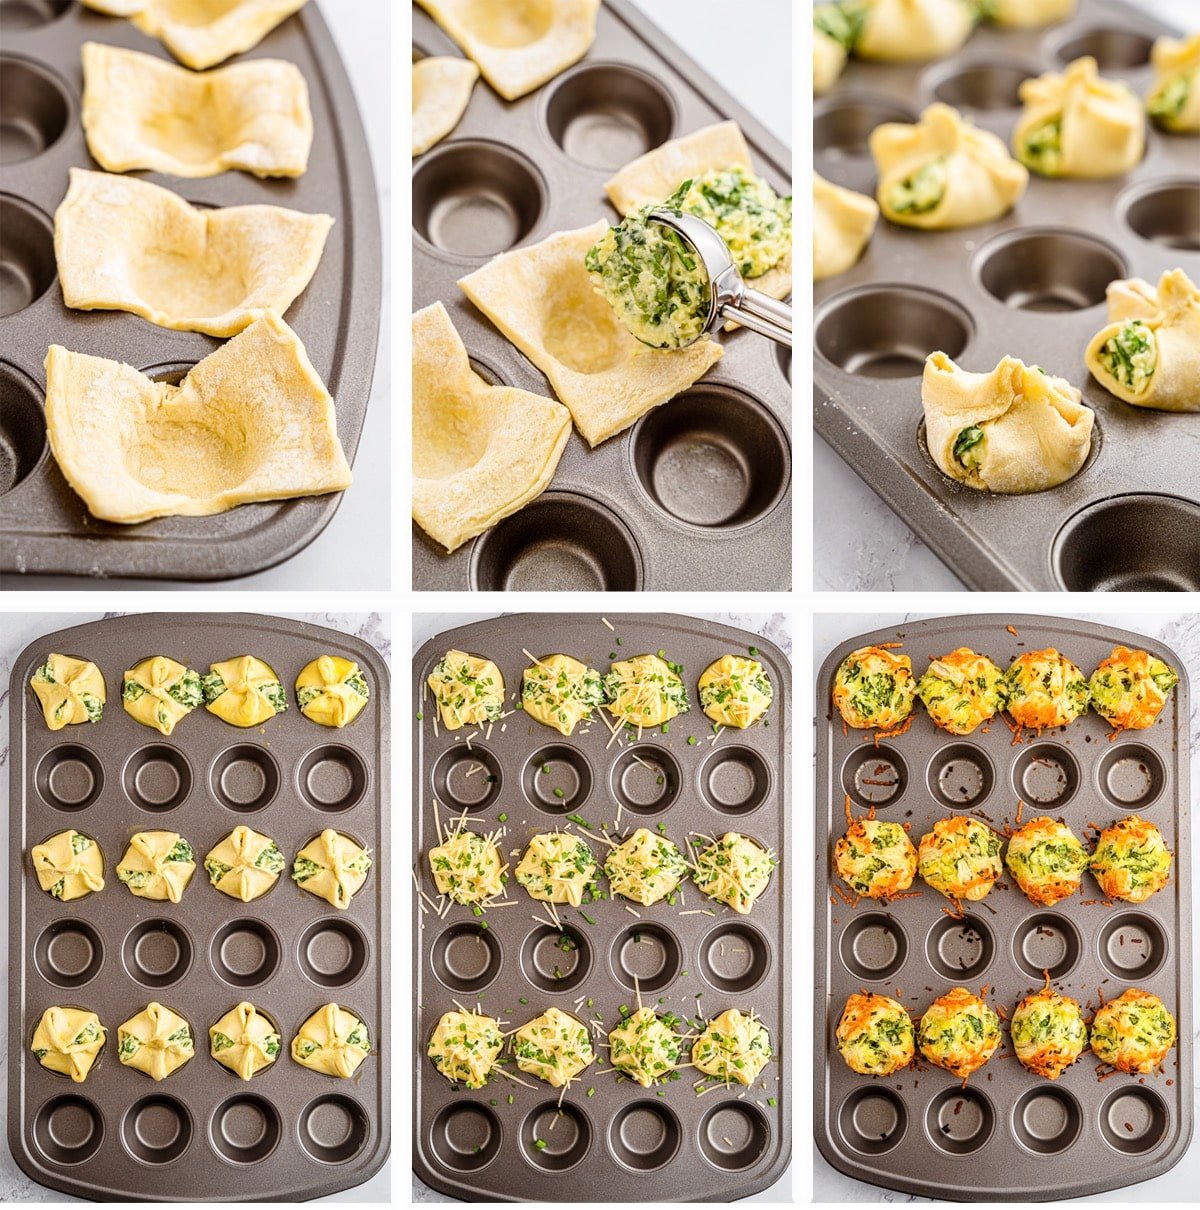 collage of images showing how to form and bake spinach puffs